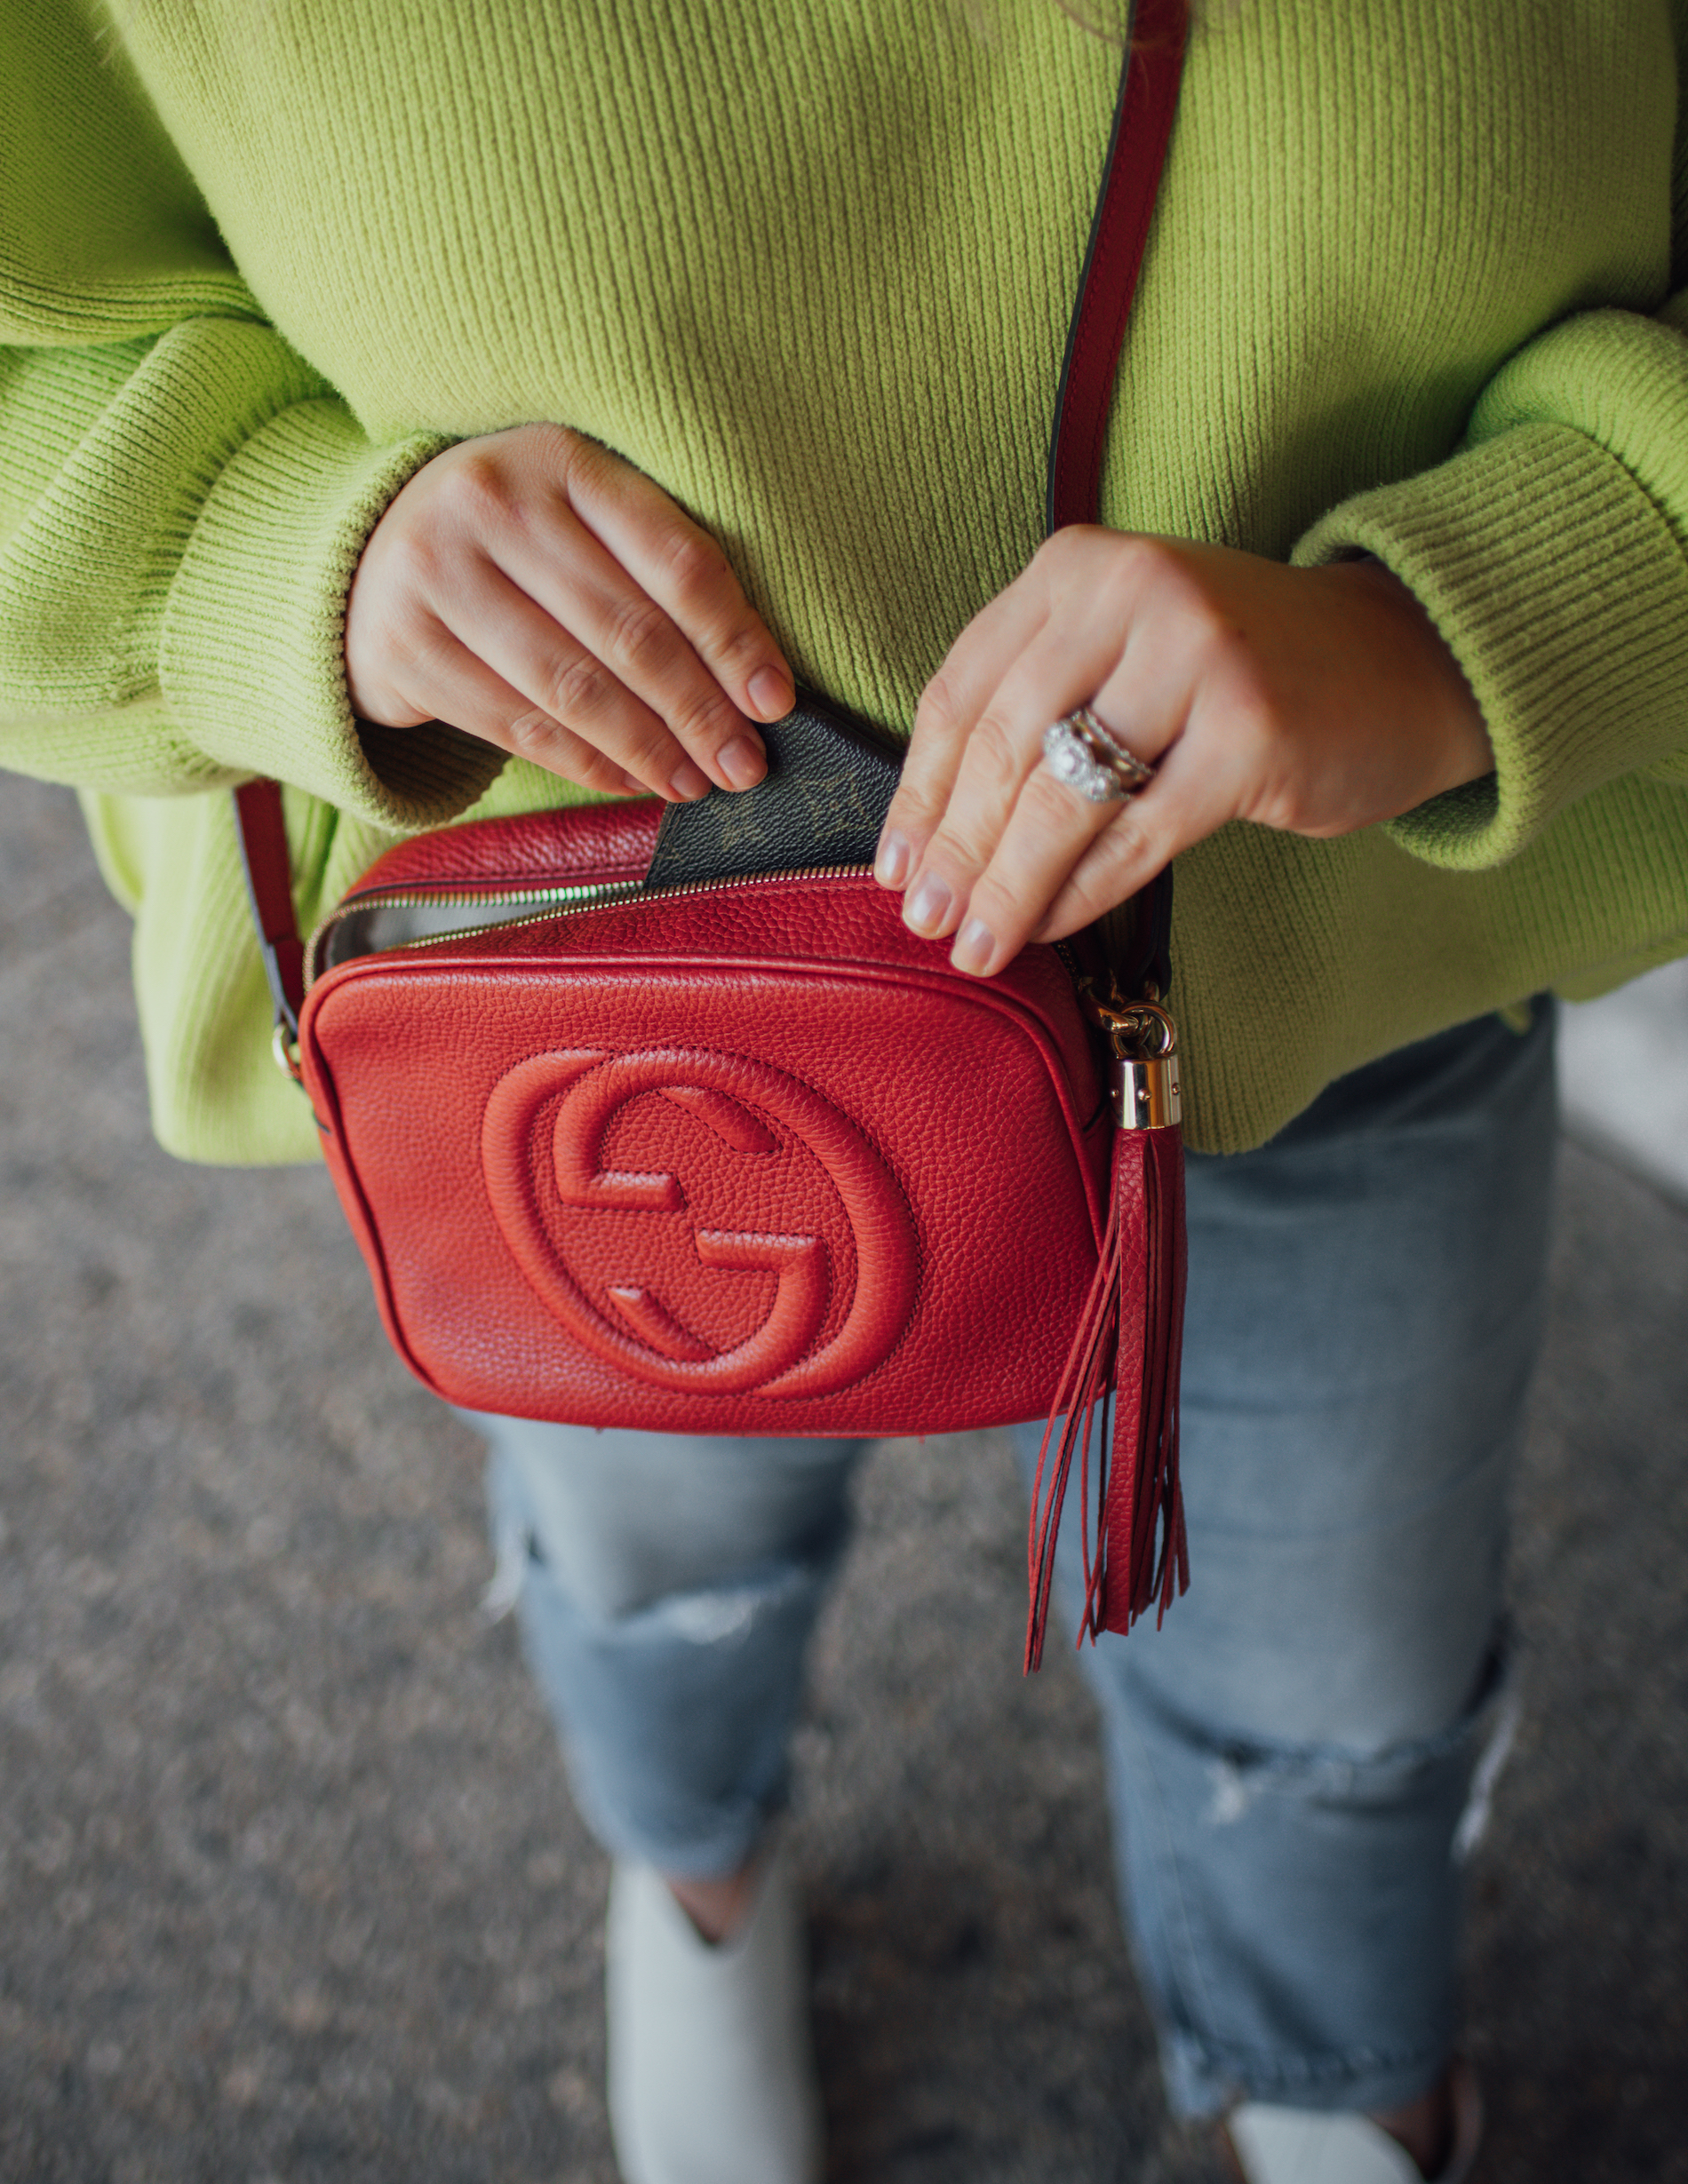 Gucci Disco Bag Review: Is the Soho Crossbody Worth It?